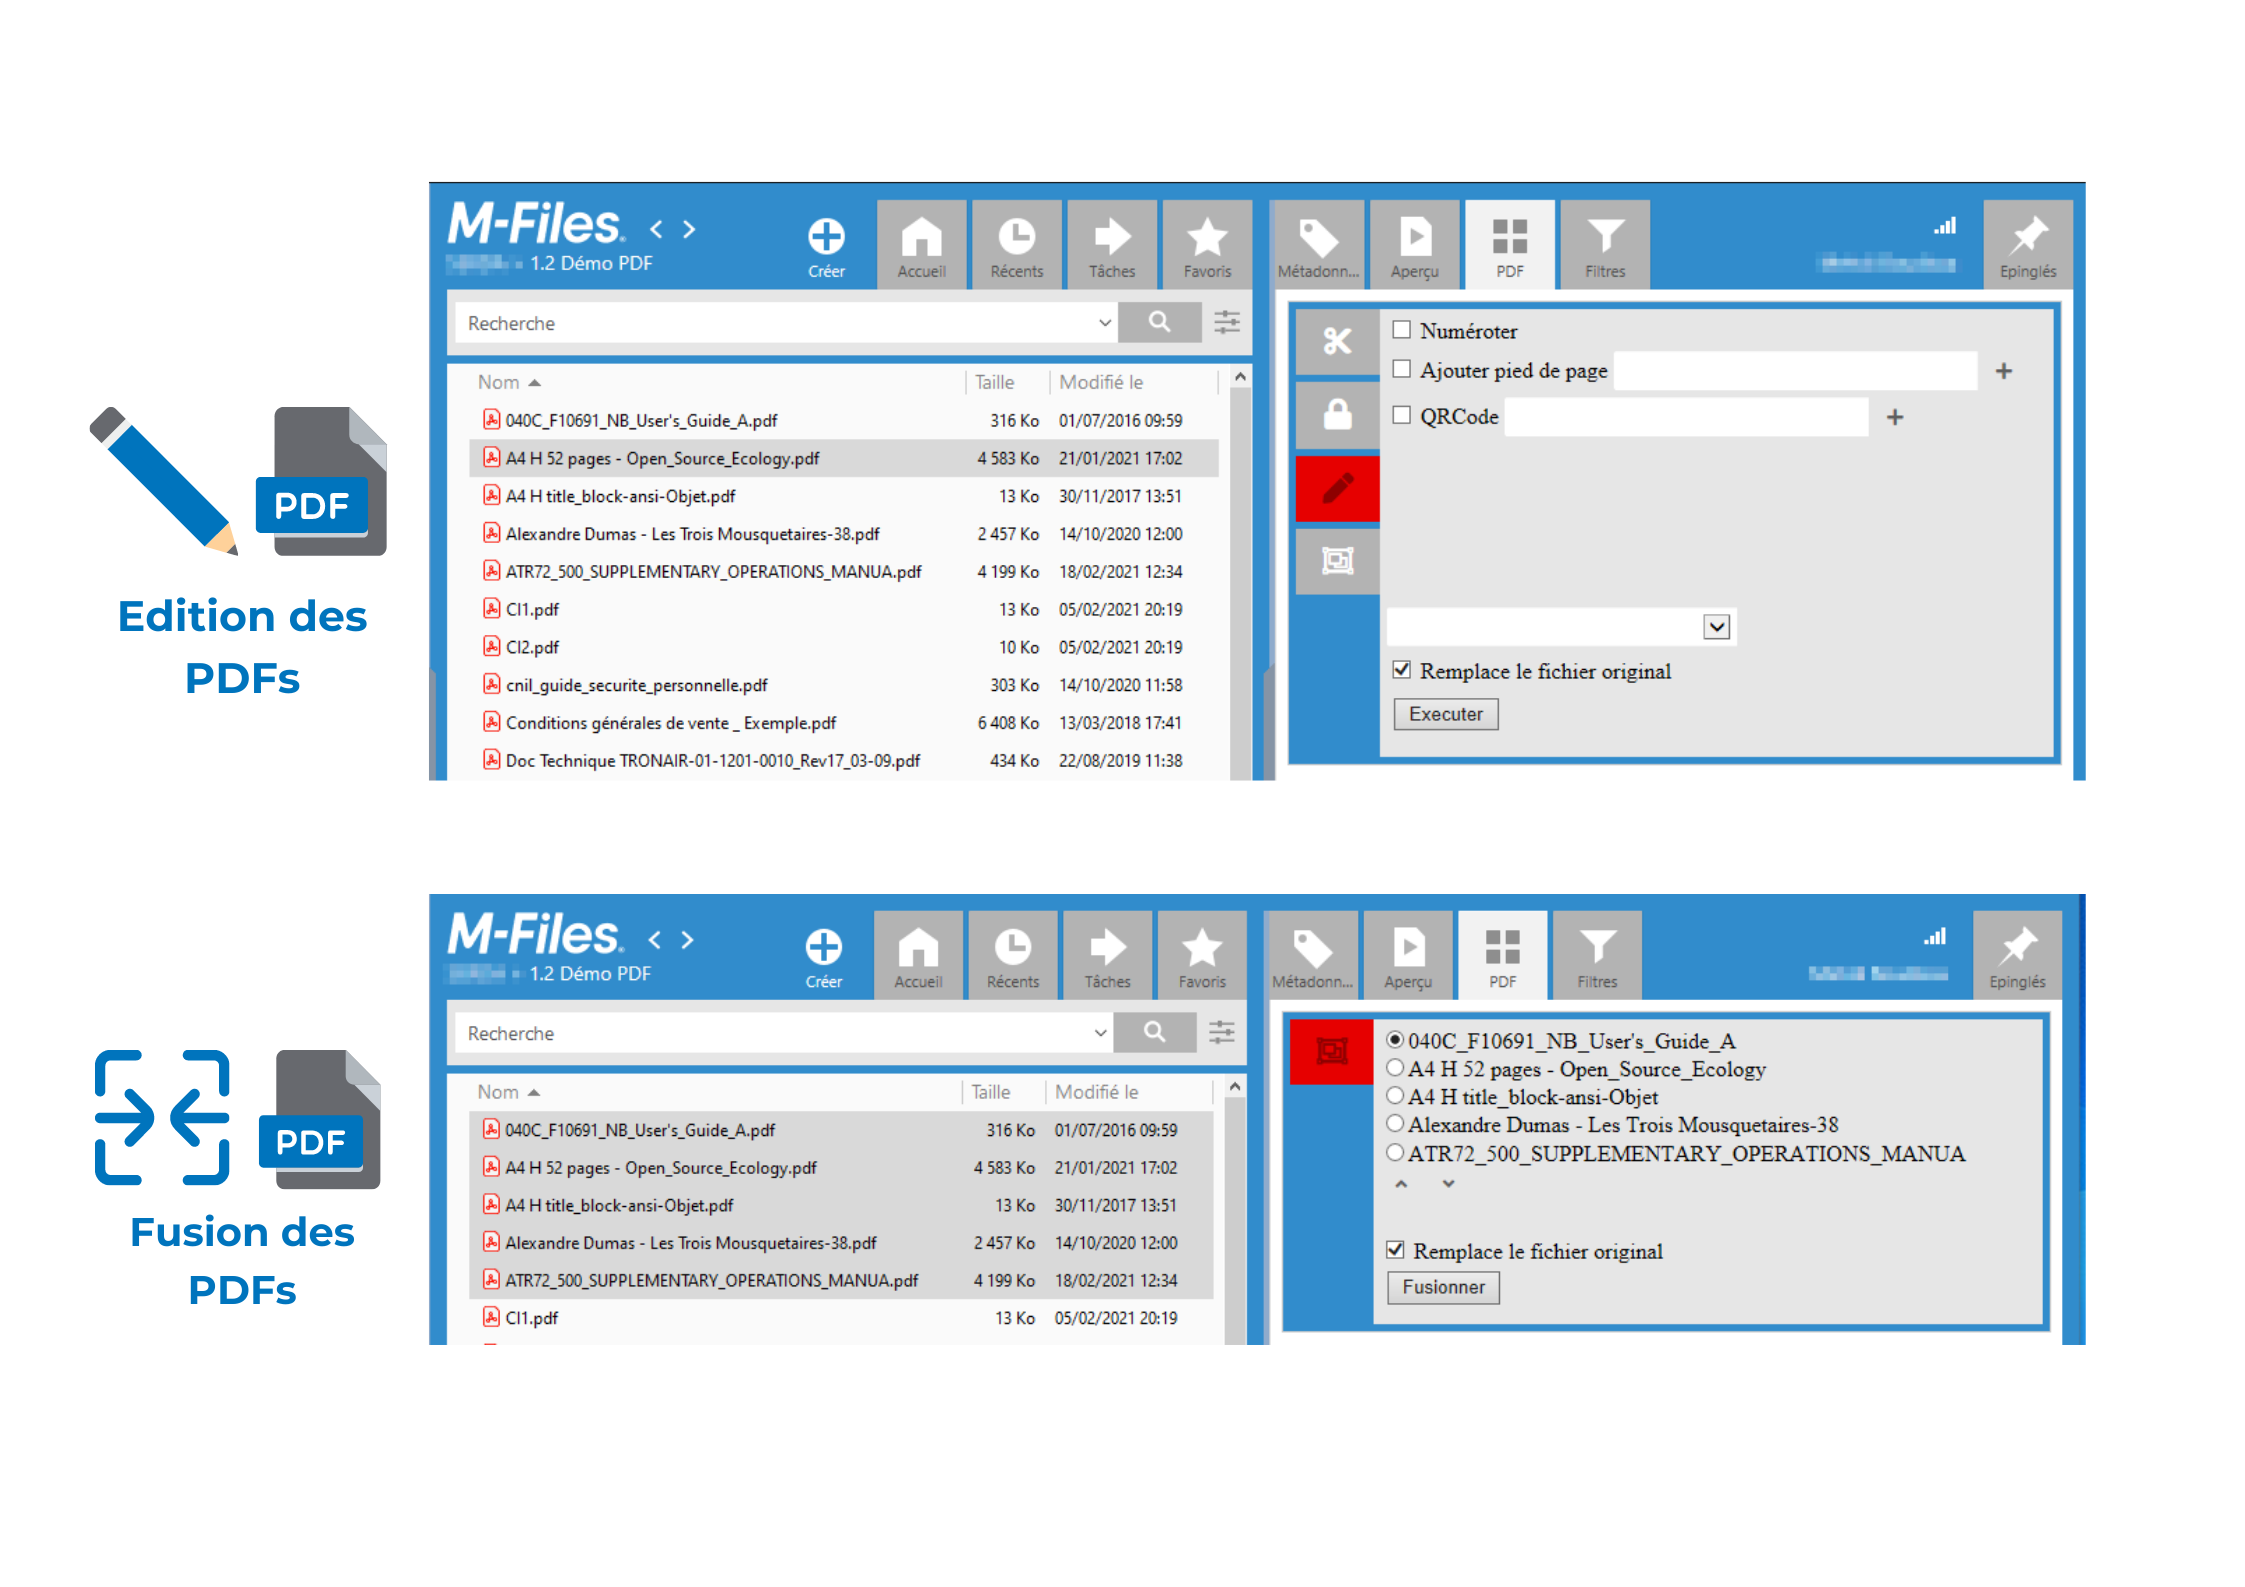 PDF Manager Edition Fusion